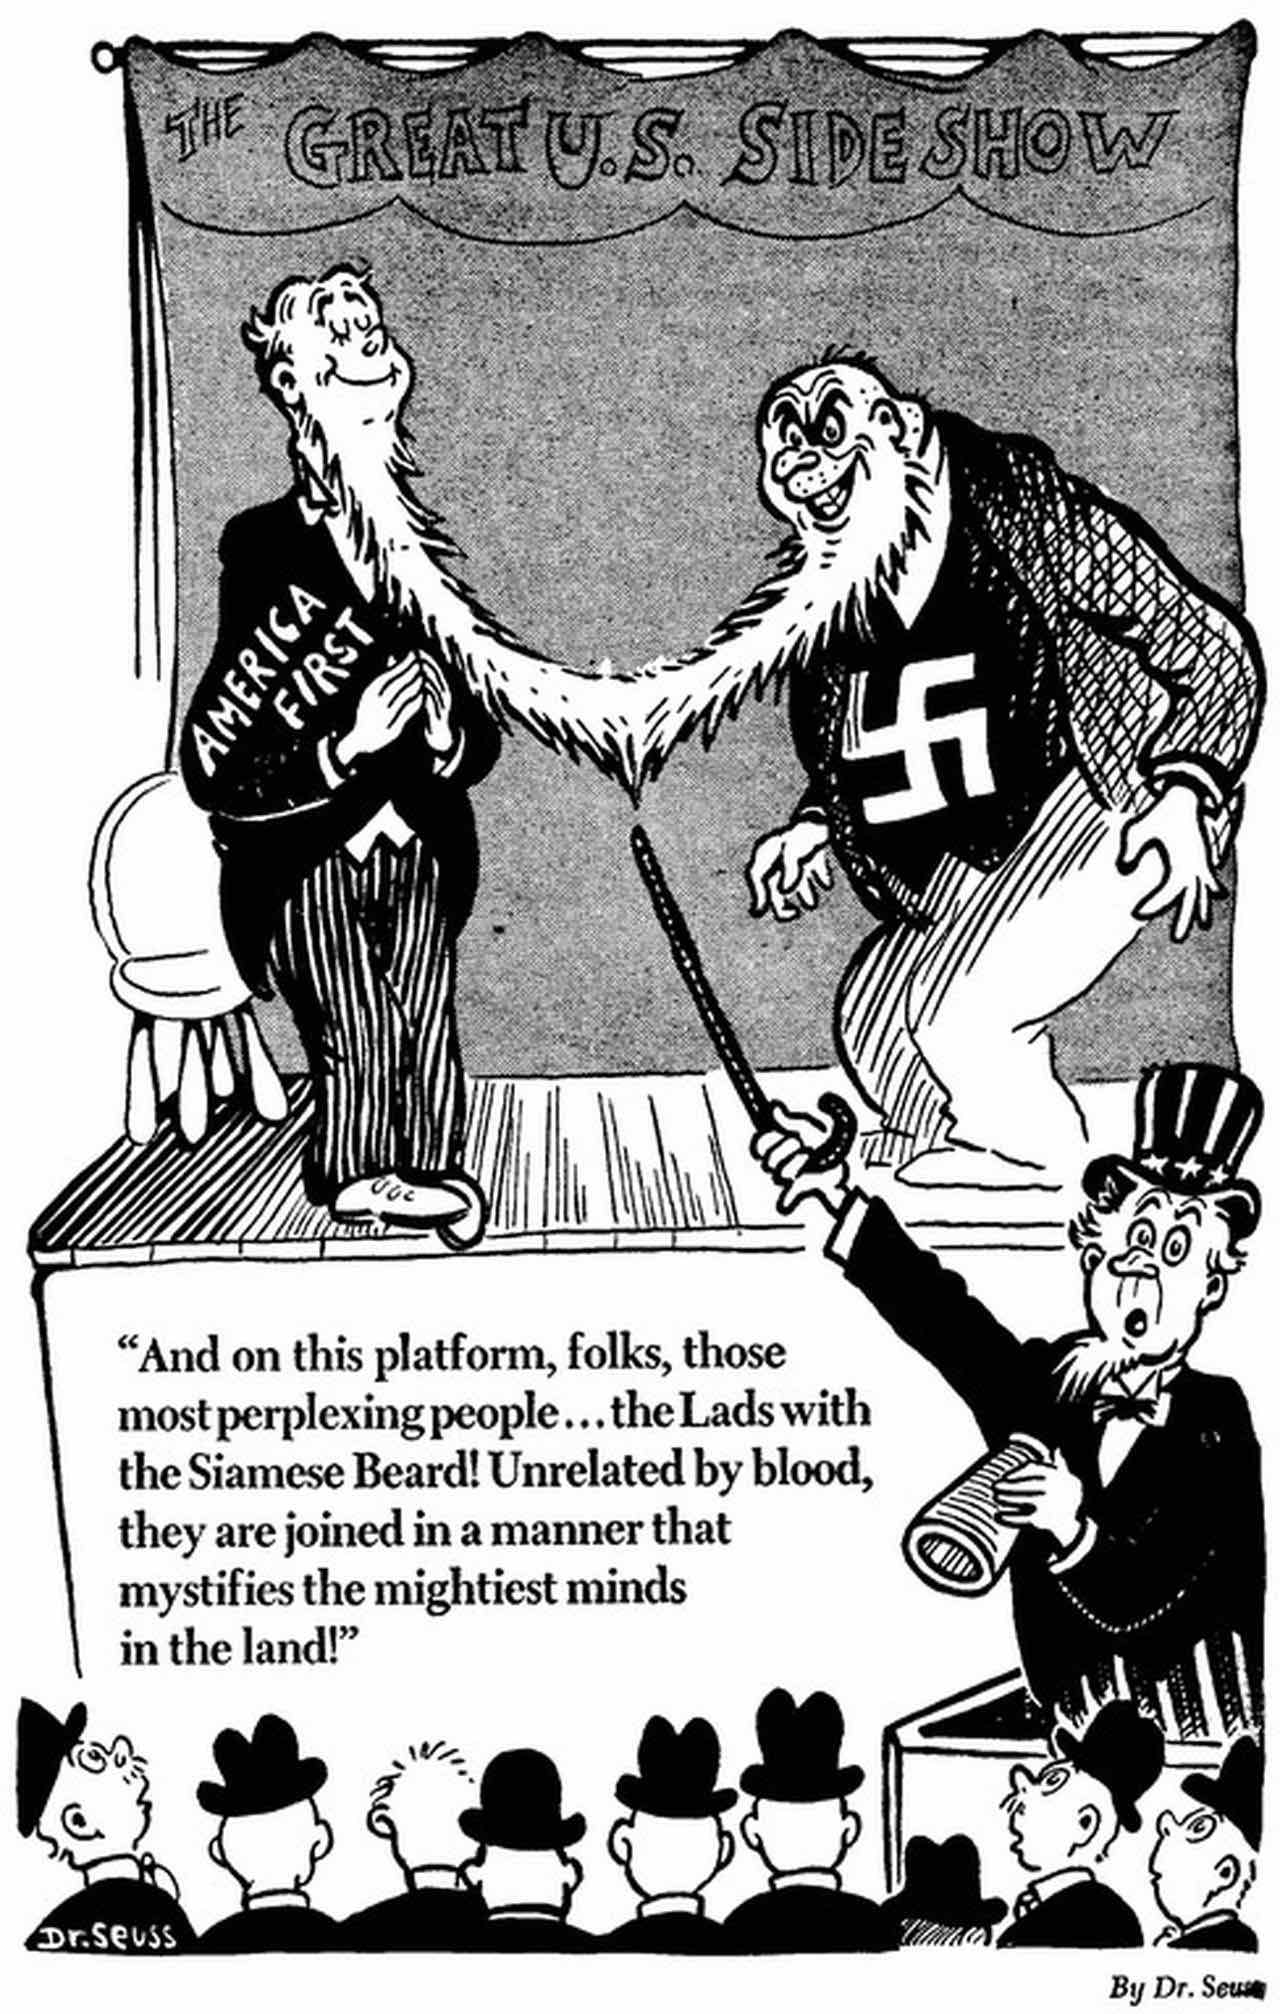 Two white men with long white beards that
are entirely intertwined; one has a shirt with the Nazi swastika and the other wears a jacket that reads 'America First' while
Uncle Sam looks at them with a horrified expression on his face